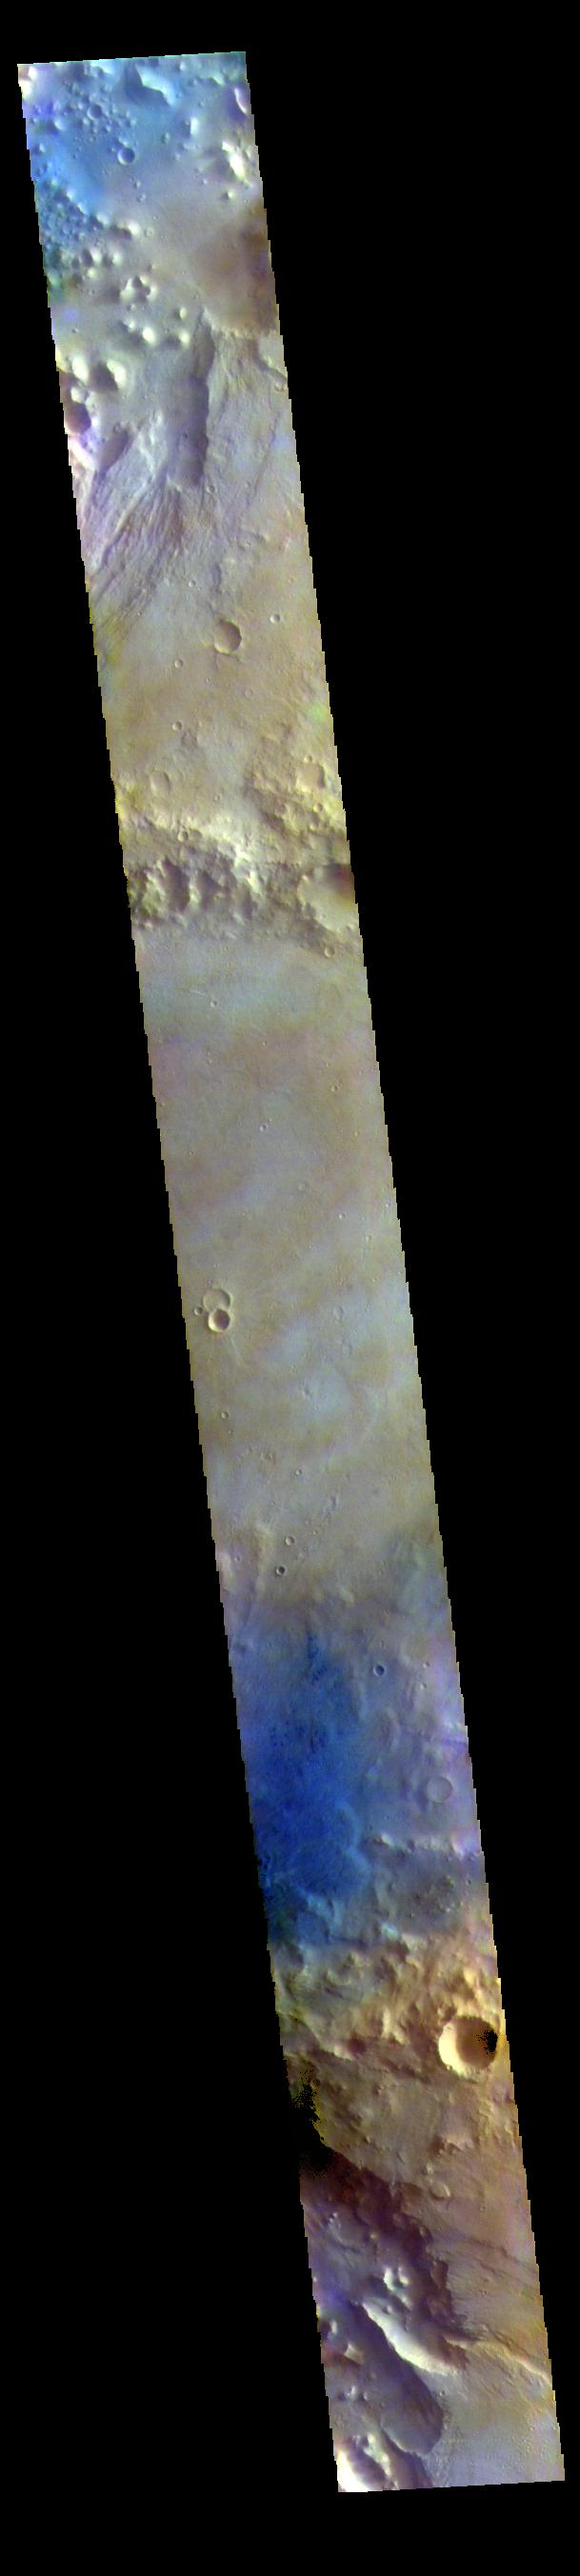 This image from NASAs Mars Odyssey shows part of Chia Crater. Chia Crater is 92 km (57 miles) in diameter and is located in Xanthe Terra just east of Maja Valles.